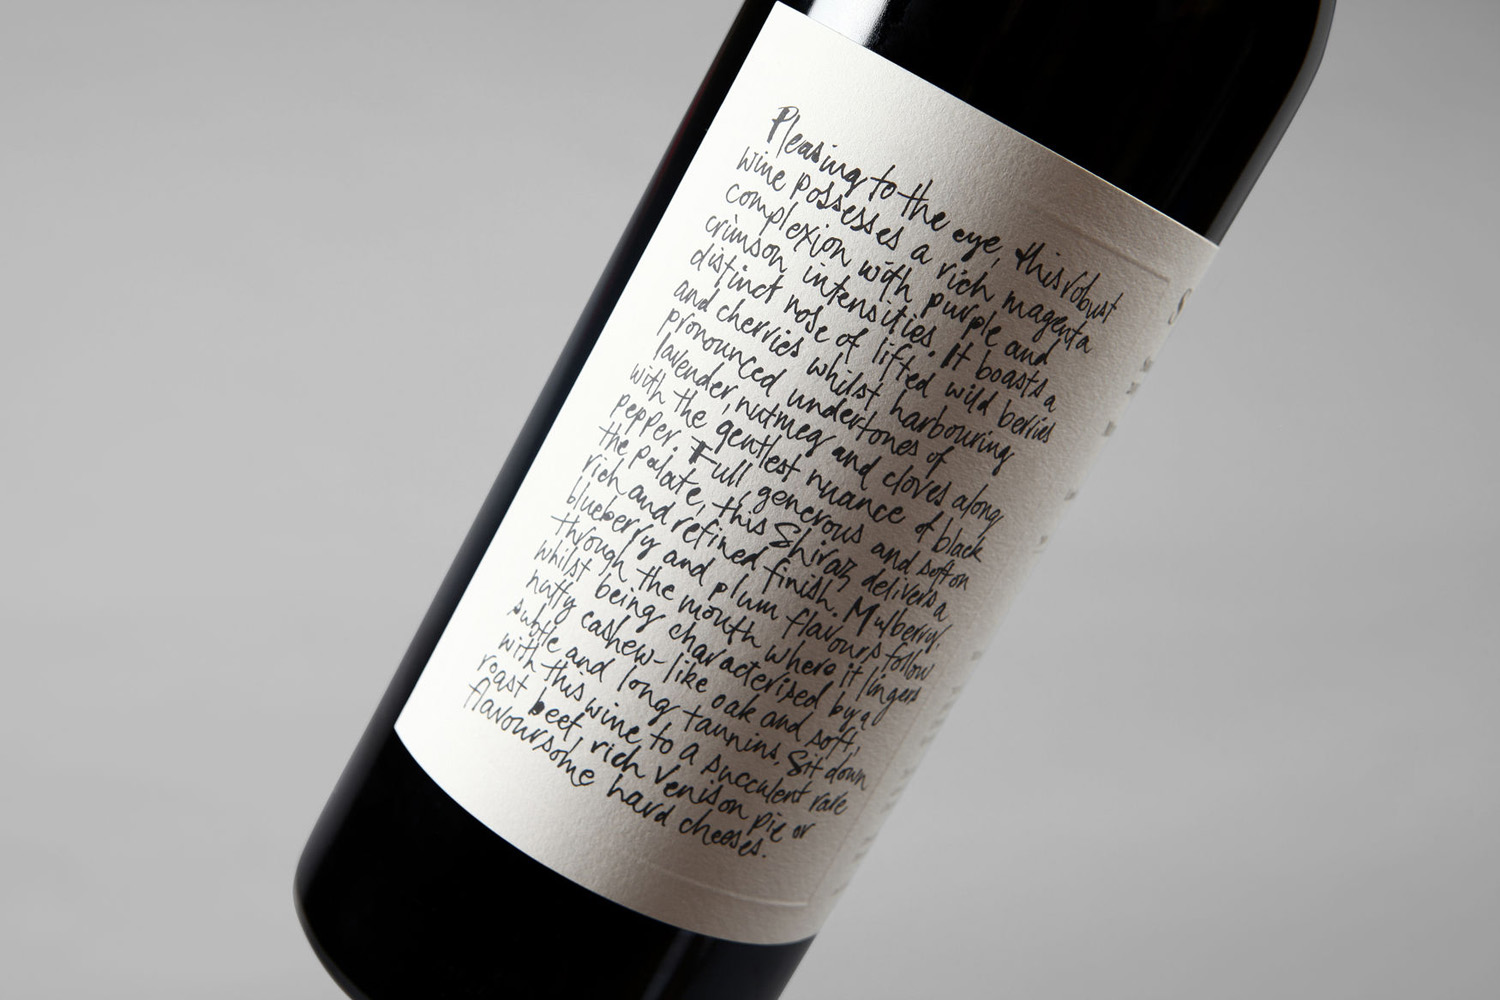 Packaging design by Sydney-based Frost for Niche Wine Co.'s limited edition release Somm, an Australian Shiraz